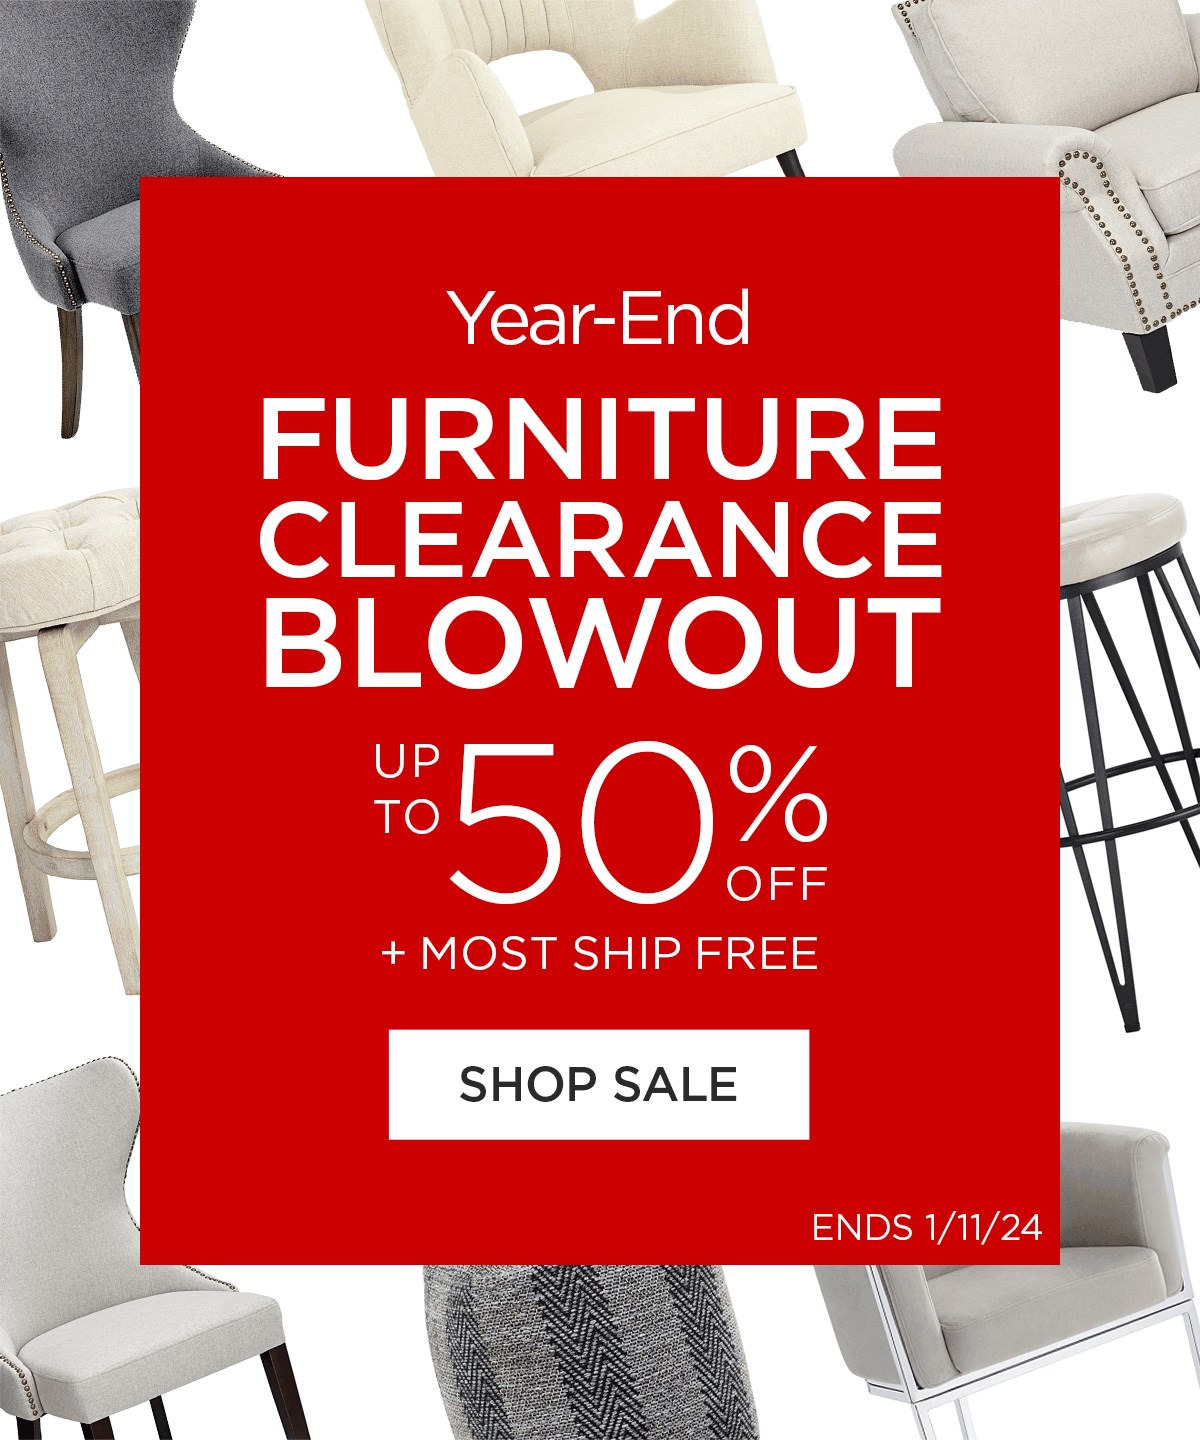 Year-End - Furniture Clearance Blowout - Up to 50% Off + Most Ship Free - Shop Sale - Ends 1/11/24